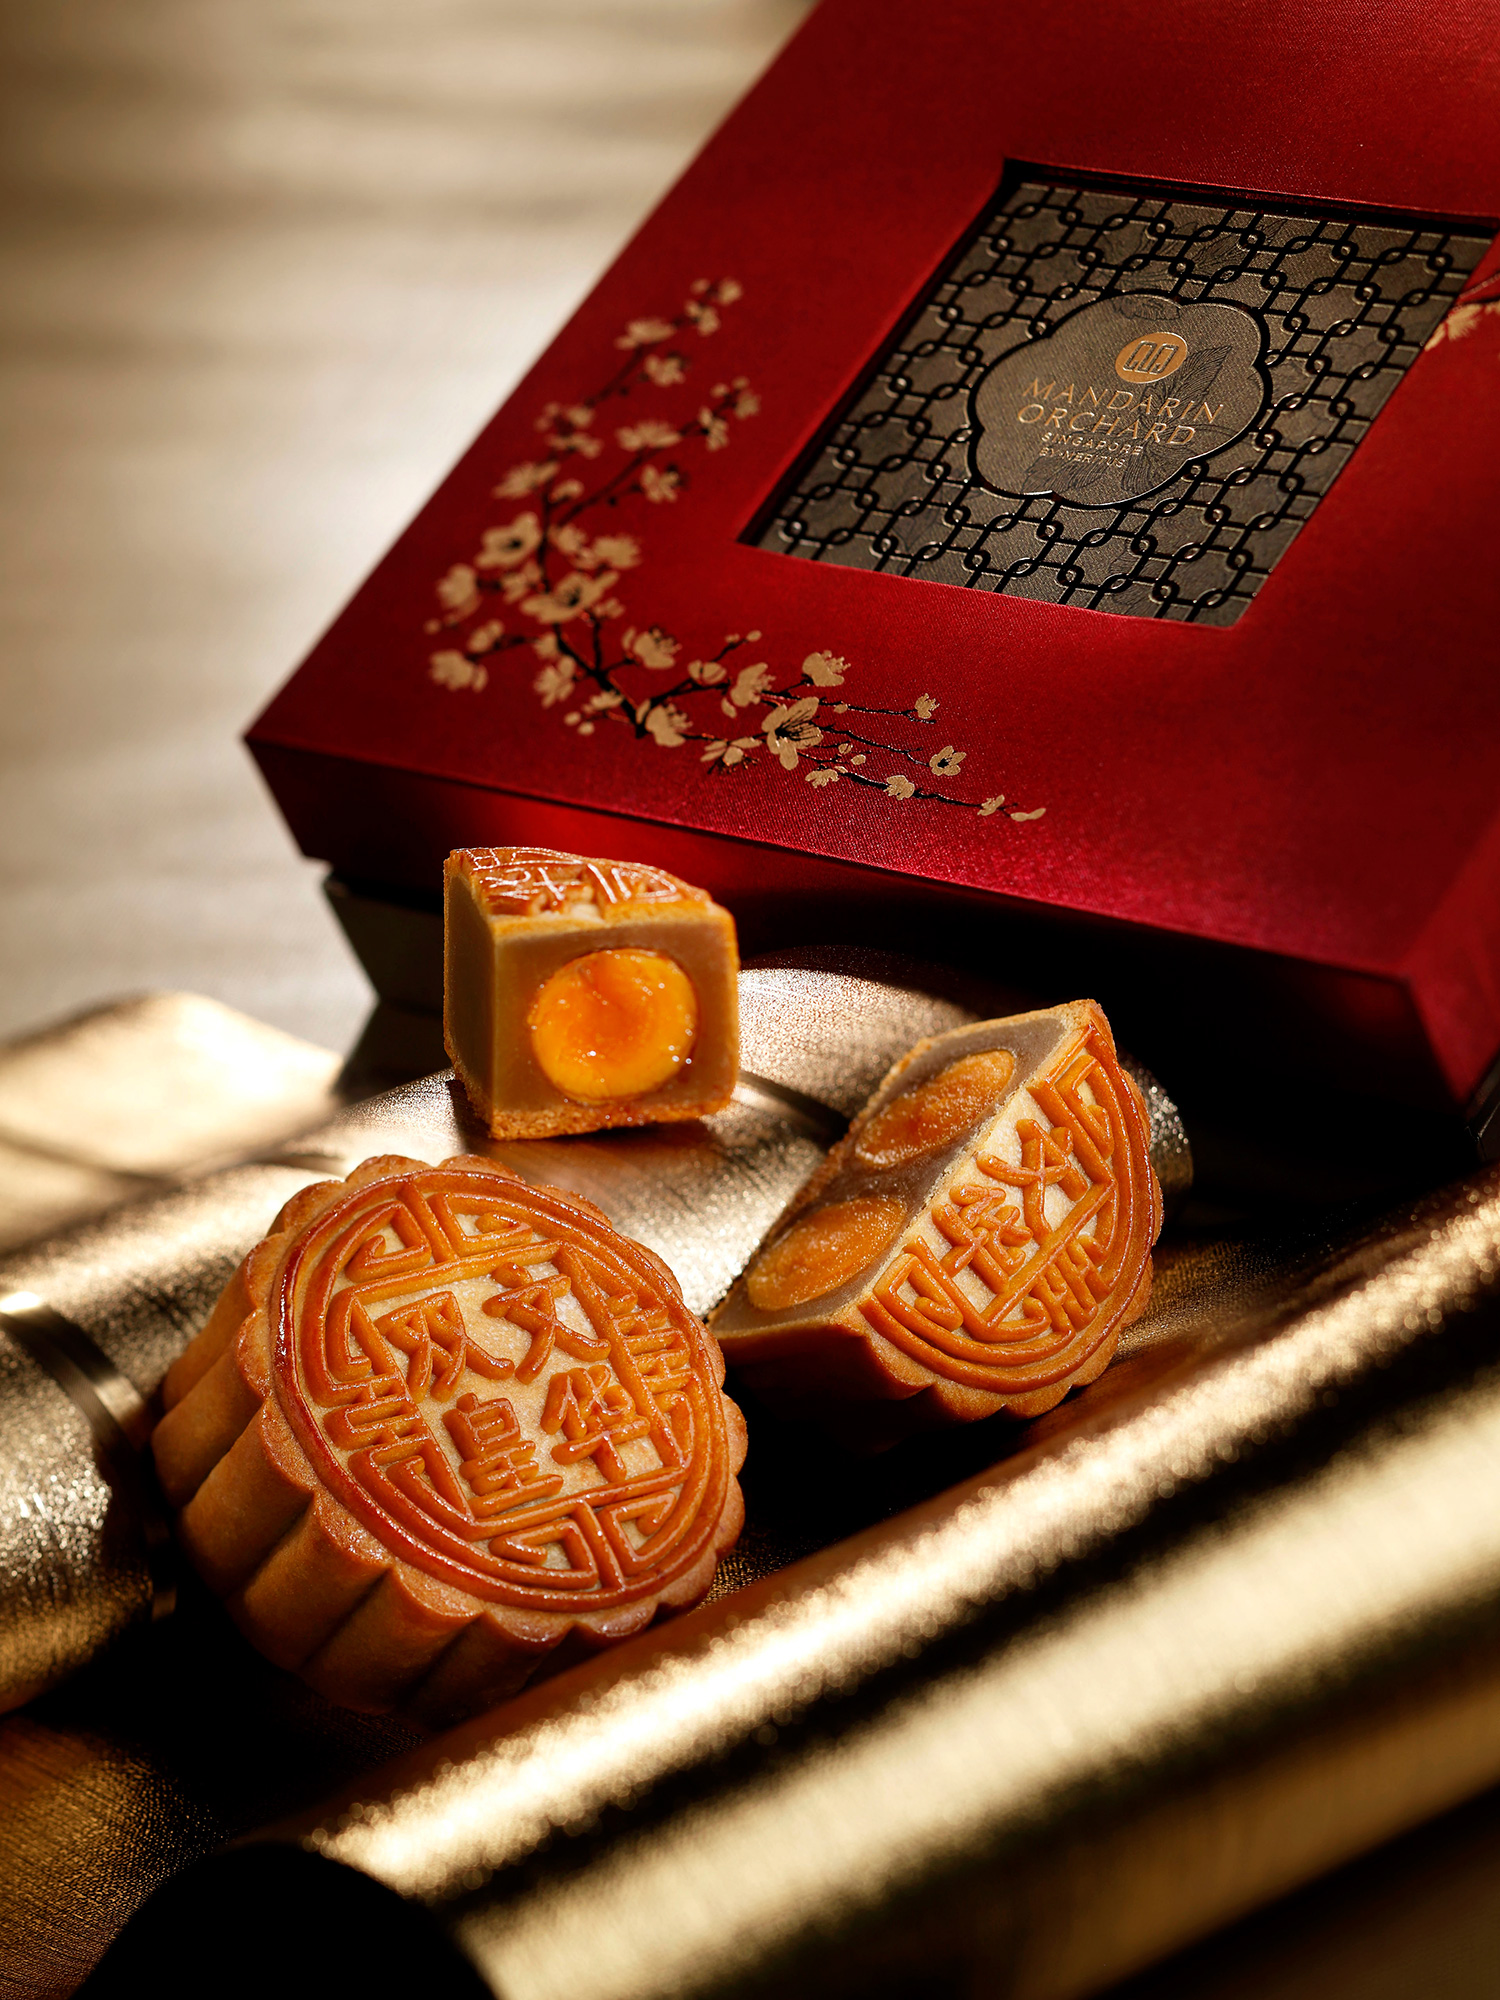 Mandarin-Orchard---Baked-Mooncake-with-Double-Yolk-and-White-Lotus-Paste-3